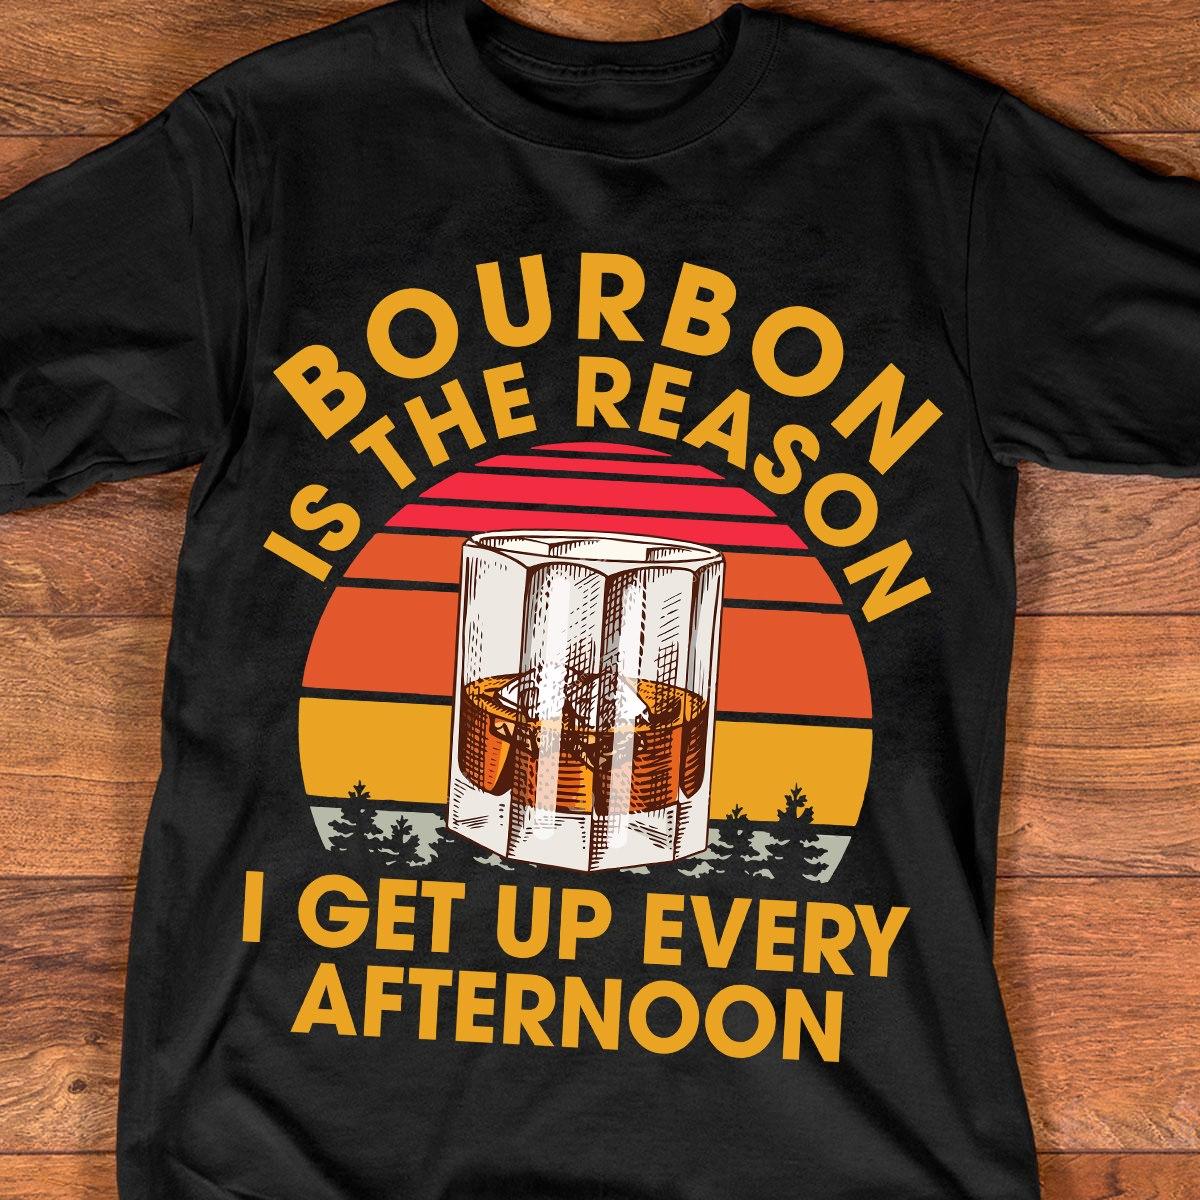 Bourbon is the reason, I get up every afternoon - Bourbon wine lover, get up drink bourbon